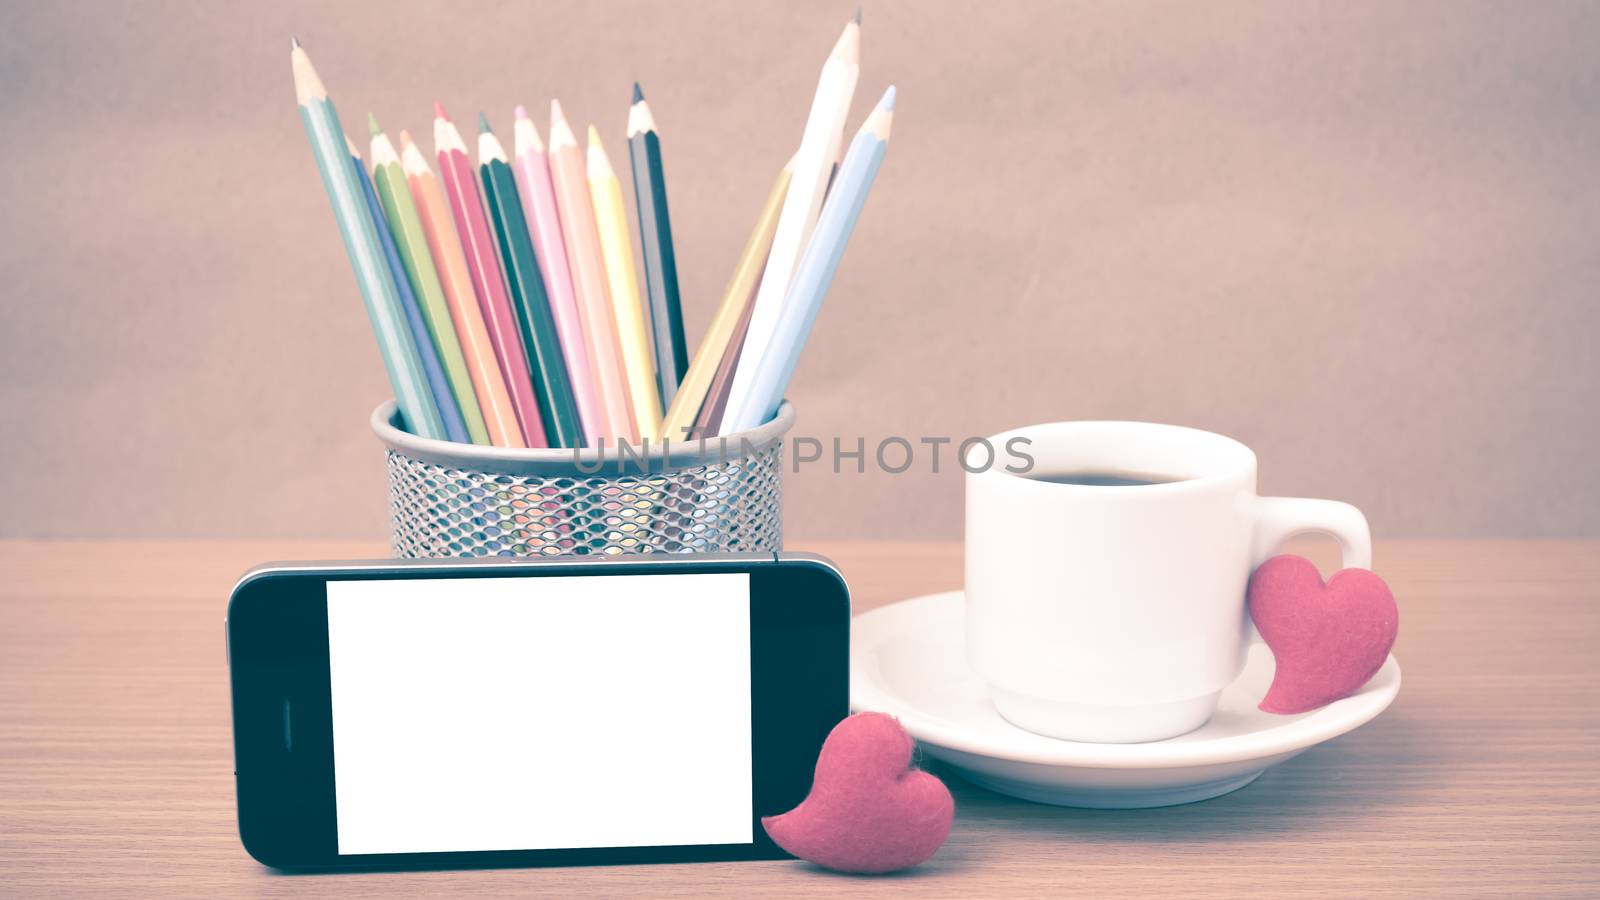 coffee,phone,color pencil and heart on wood table background vintage style